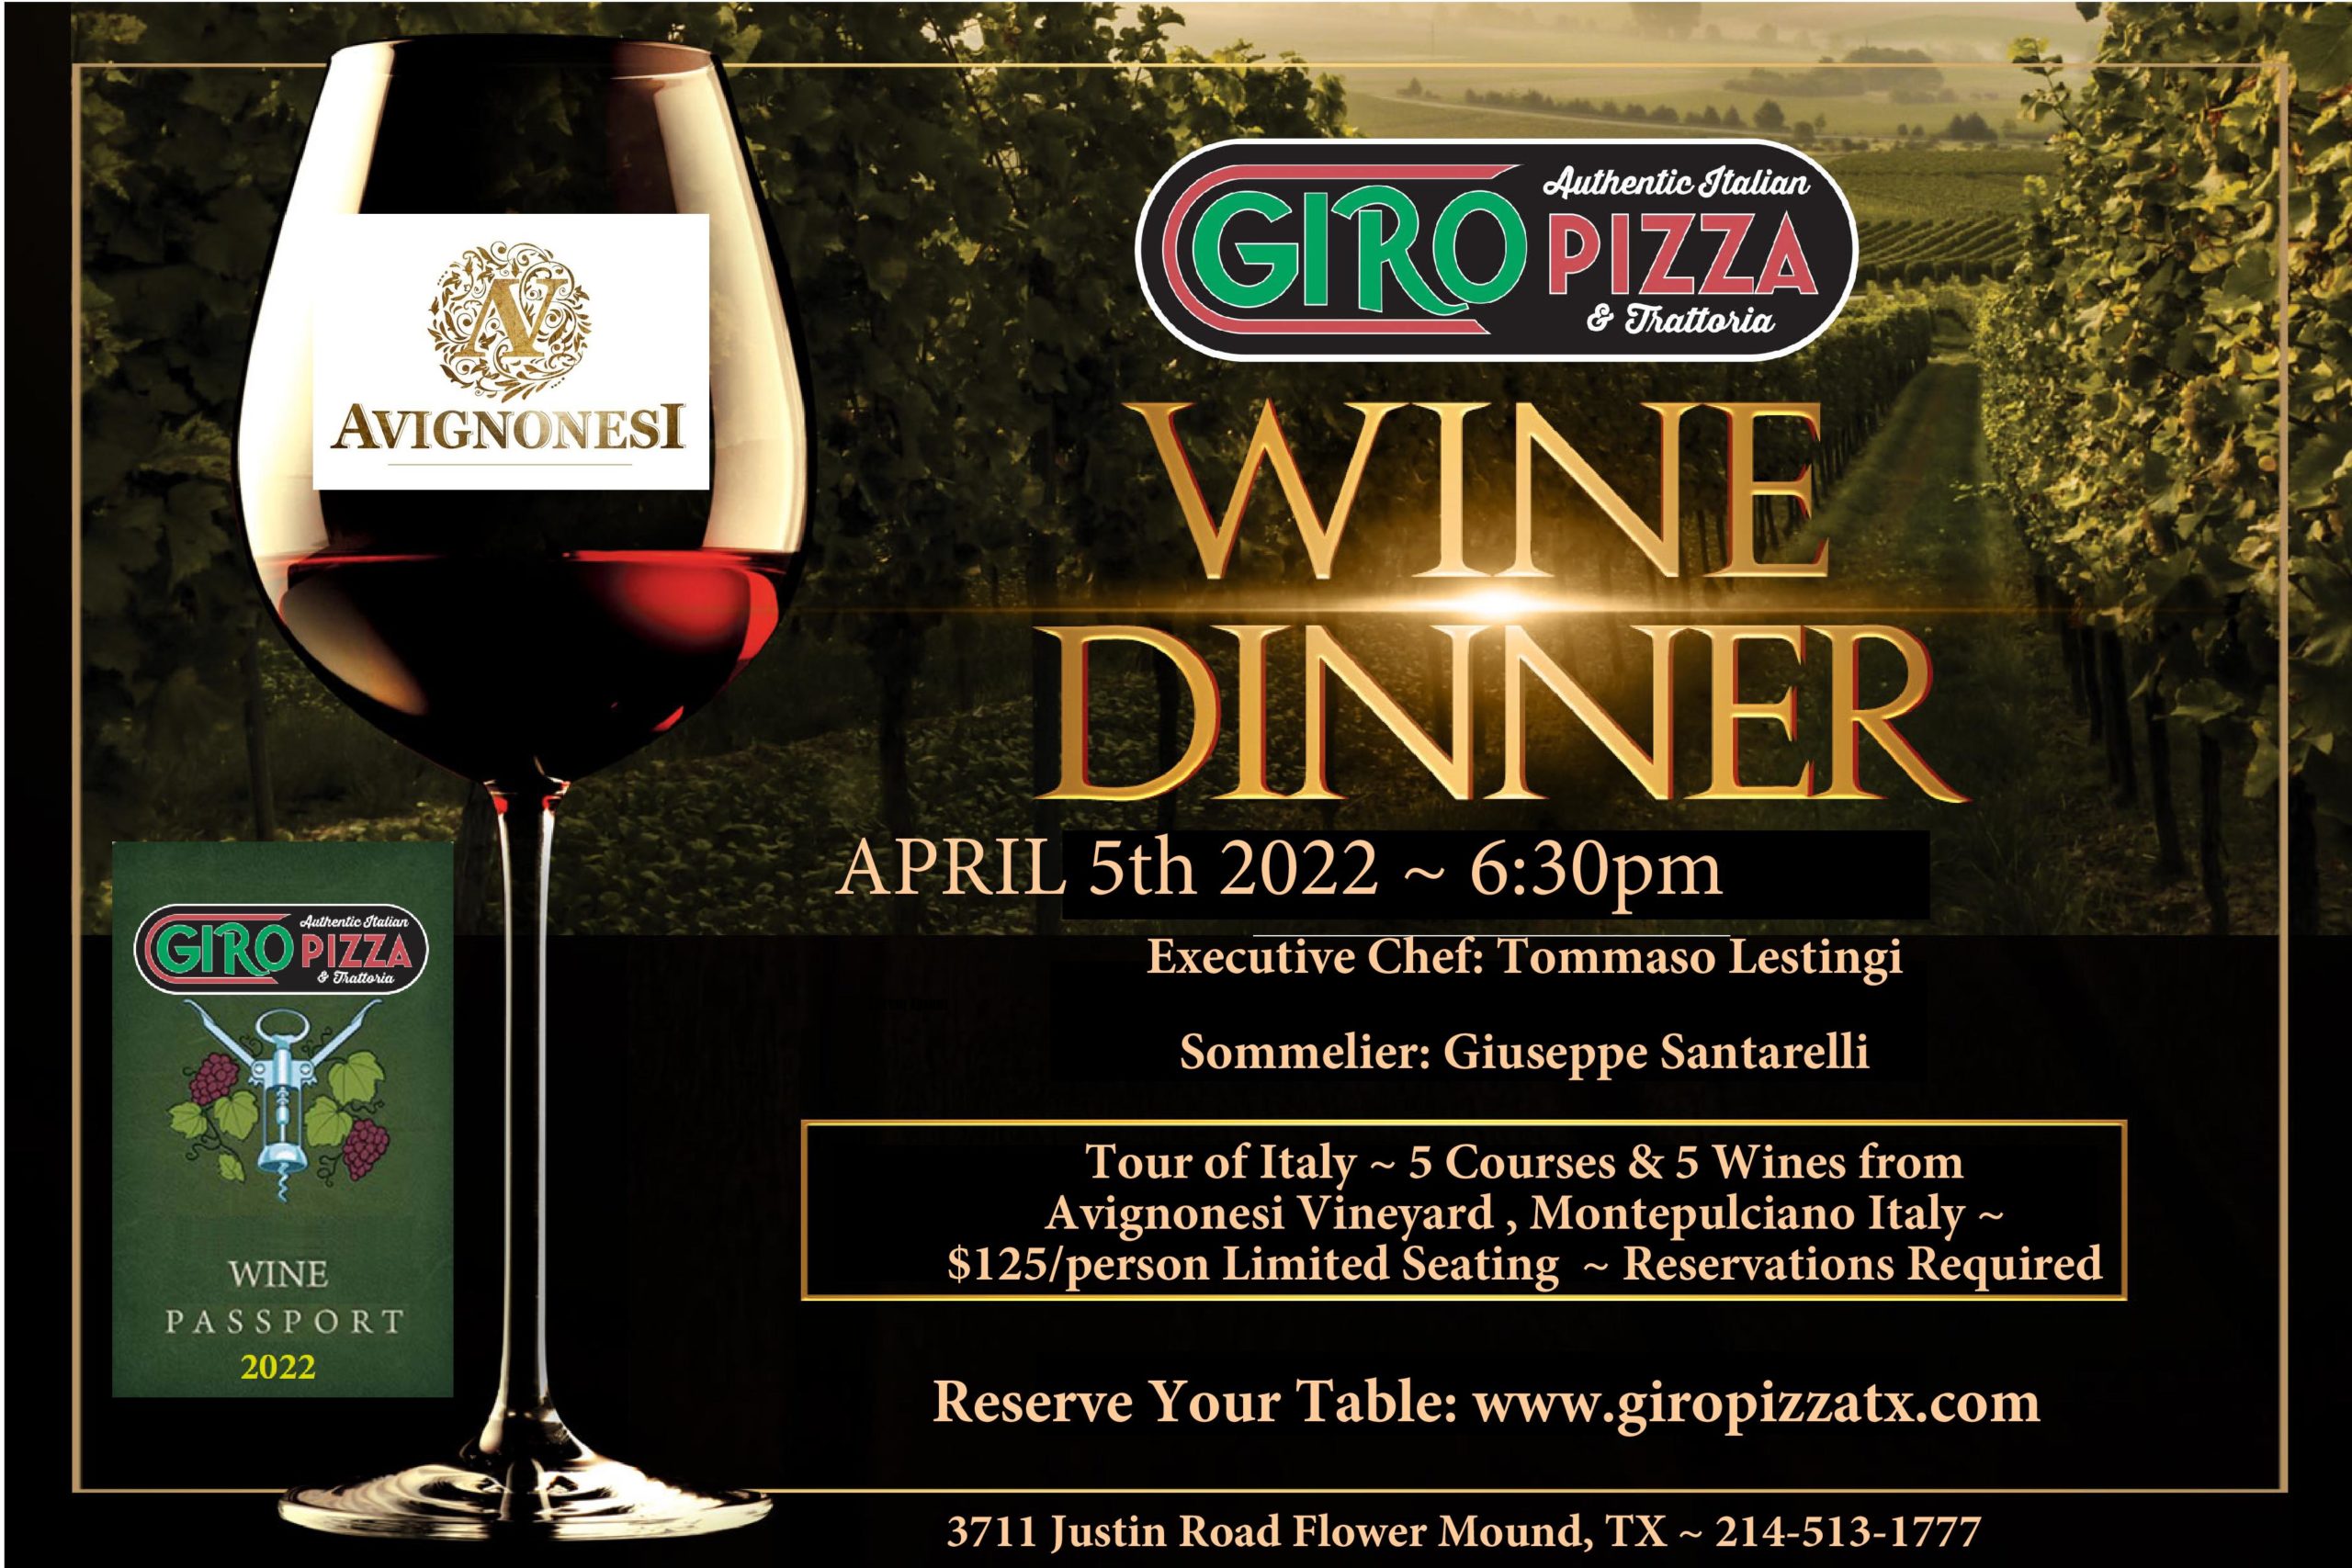 Reserve Your Table, Classic Italian Dining